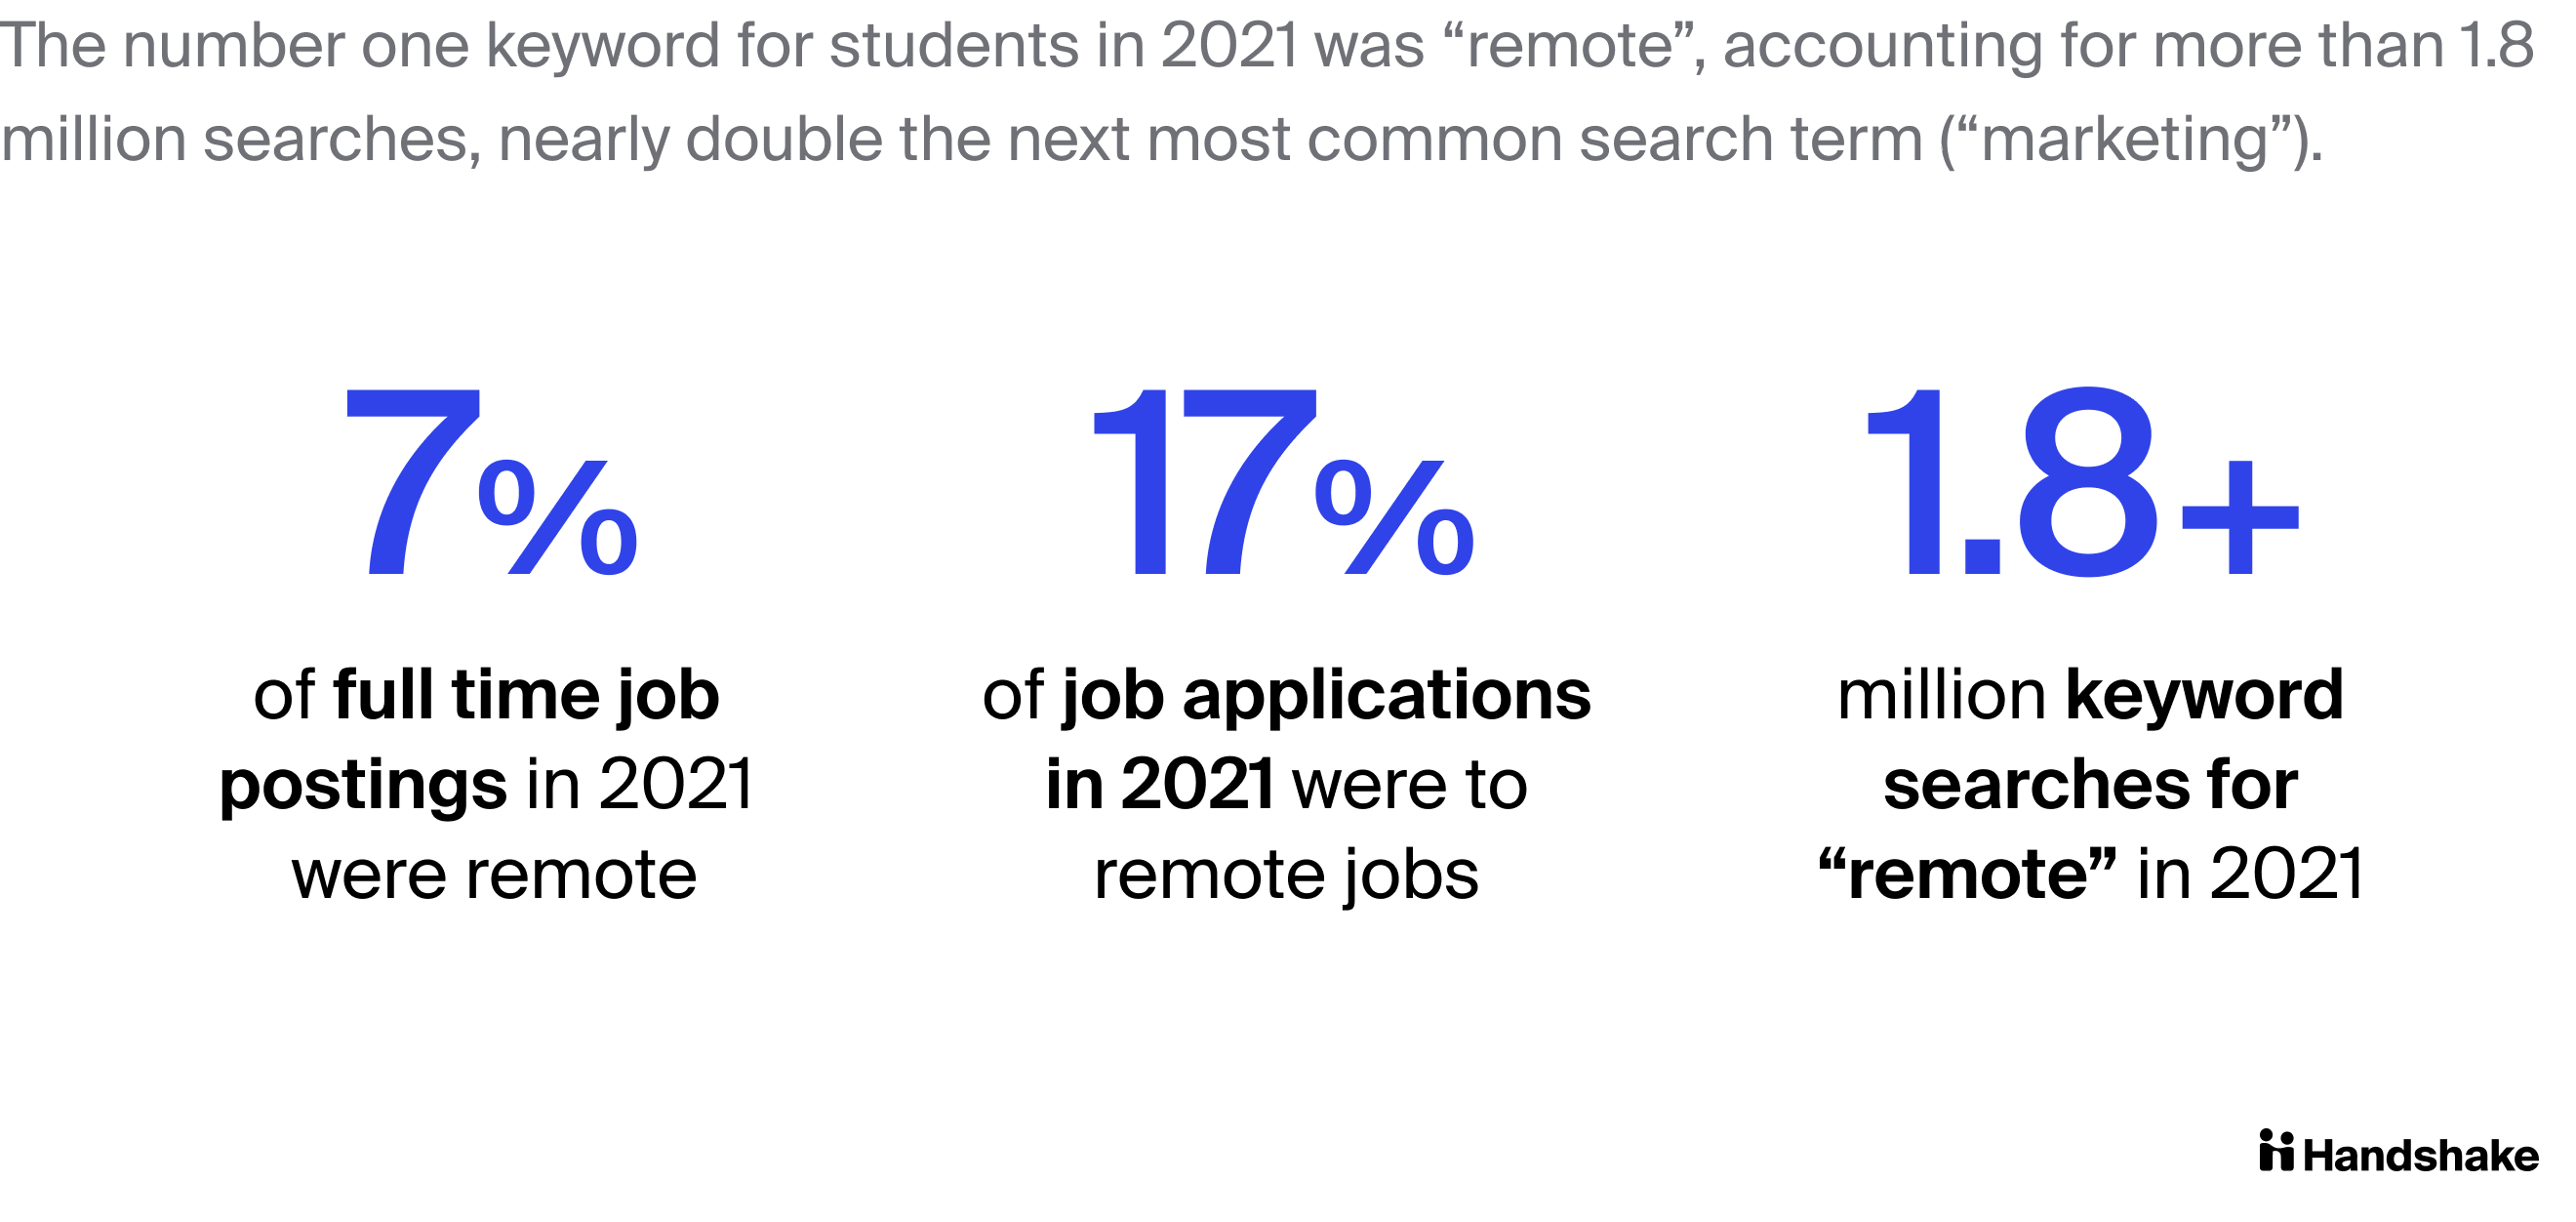 The number one keyword for students in 2021 was “remote”, accounting for more than 1.8 million searches, nearly double the next most common search term (“marketing”) Three stats showing the popularity of remote jobs: 7% of full-time job postings were remote; 17% of job applications were to remote jobs; 1.8+ million searches for "remote" in 2021